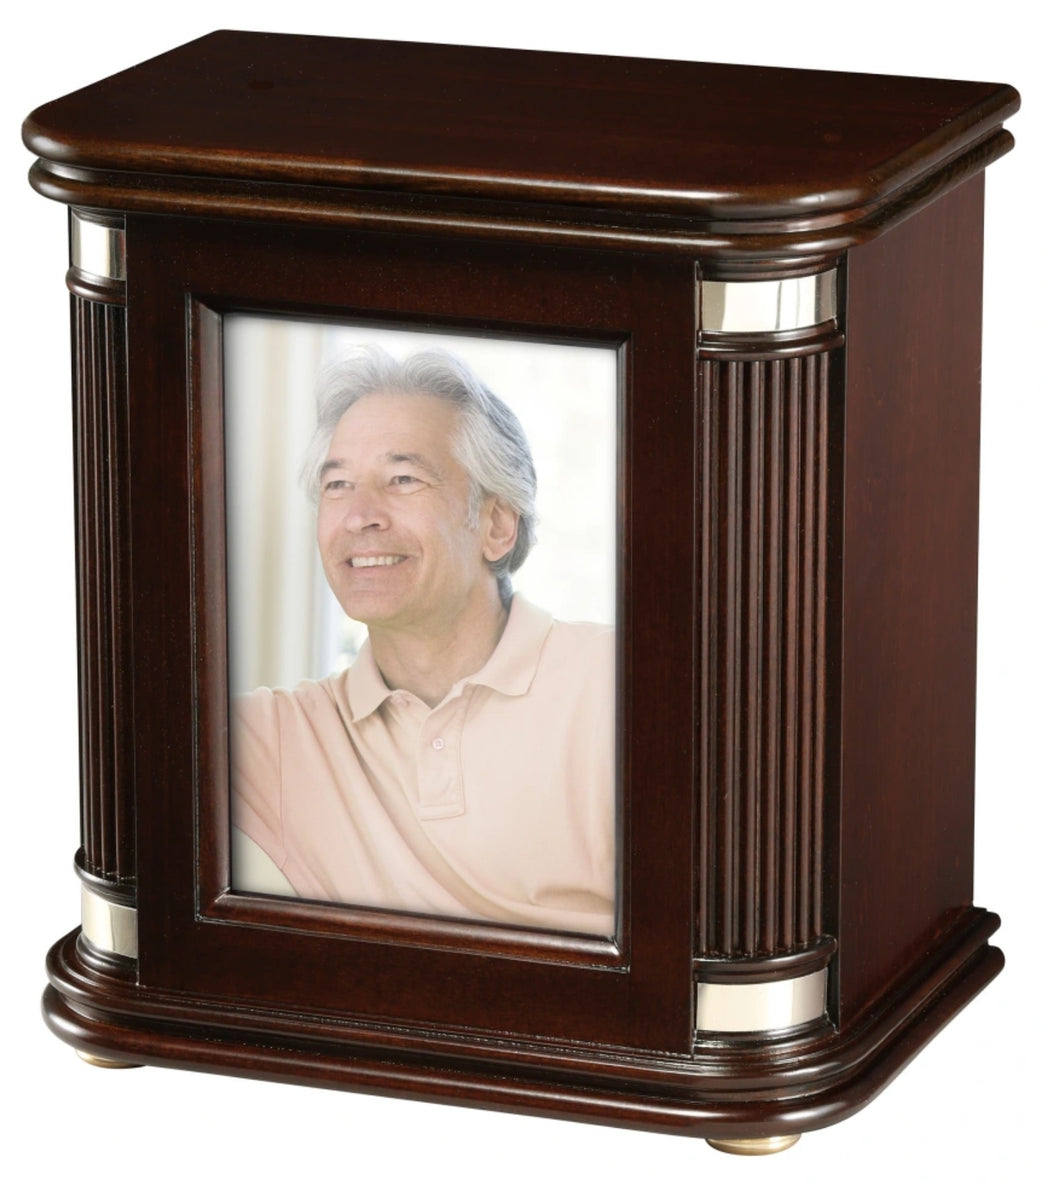 Howard Miller Honor III 800-237 (800237) Funeral Cremation Photo Urn, 270 ins.